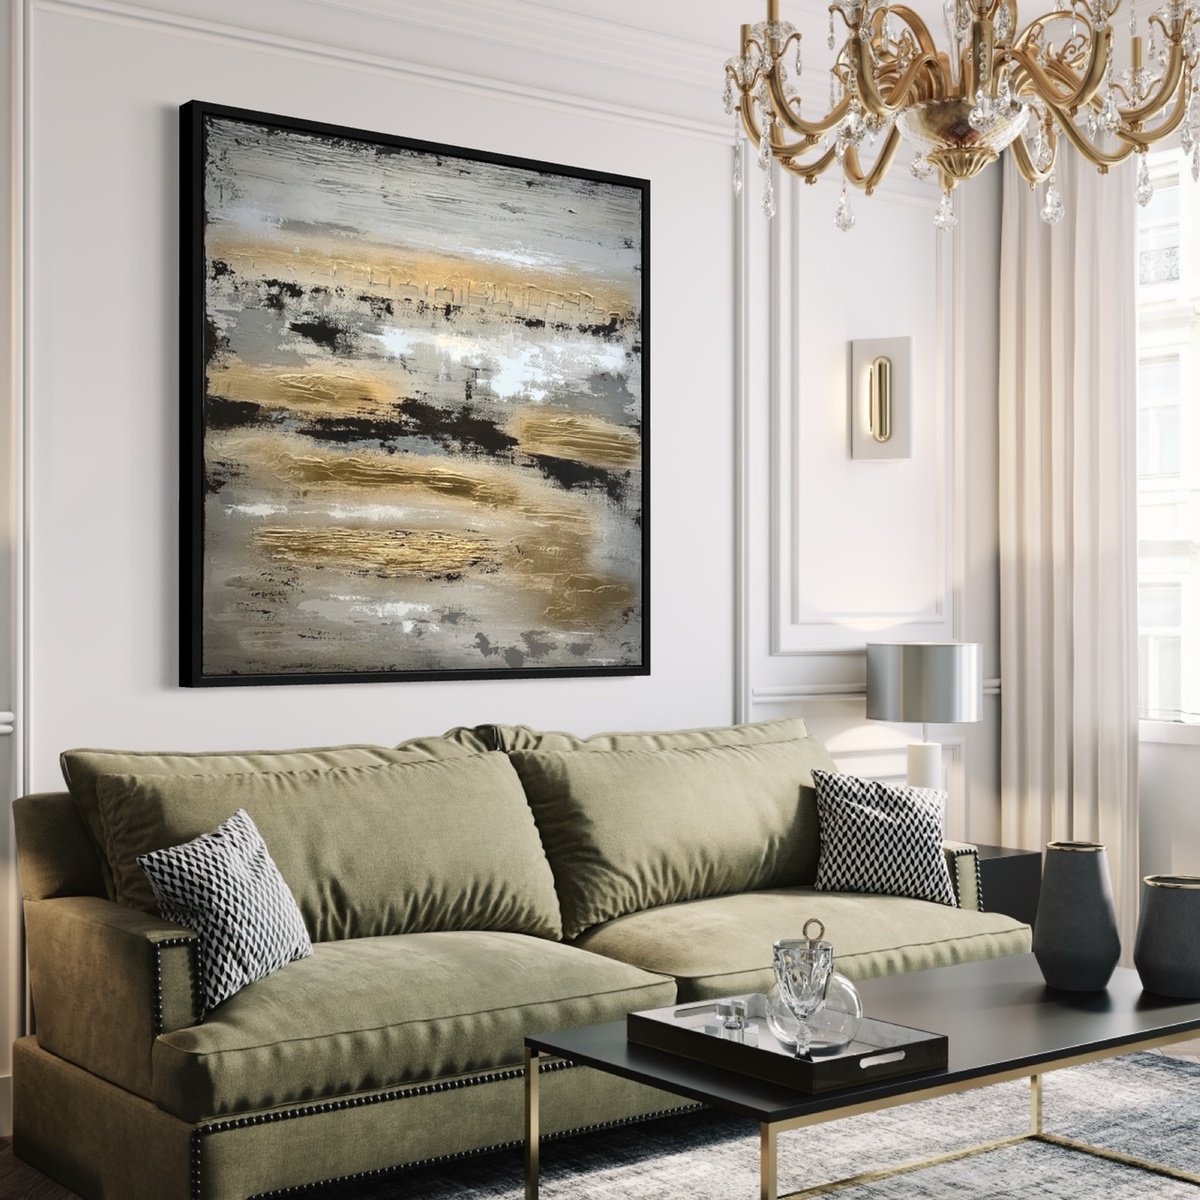 Cities Of Gold - Large Textured Abstract Seascape by Sarah Berger